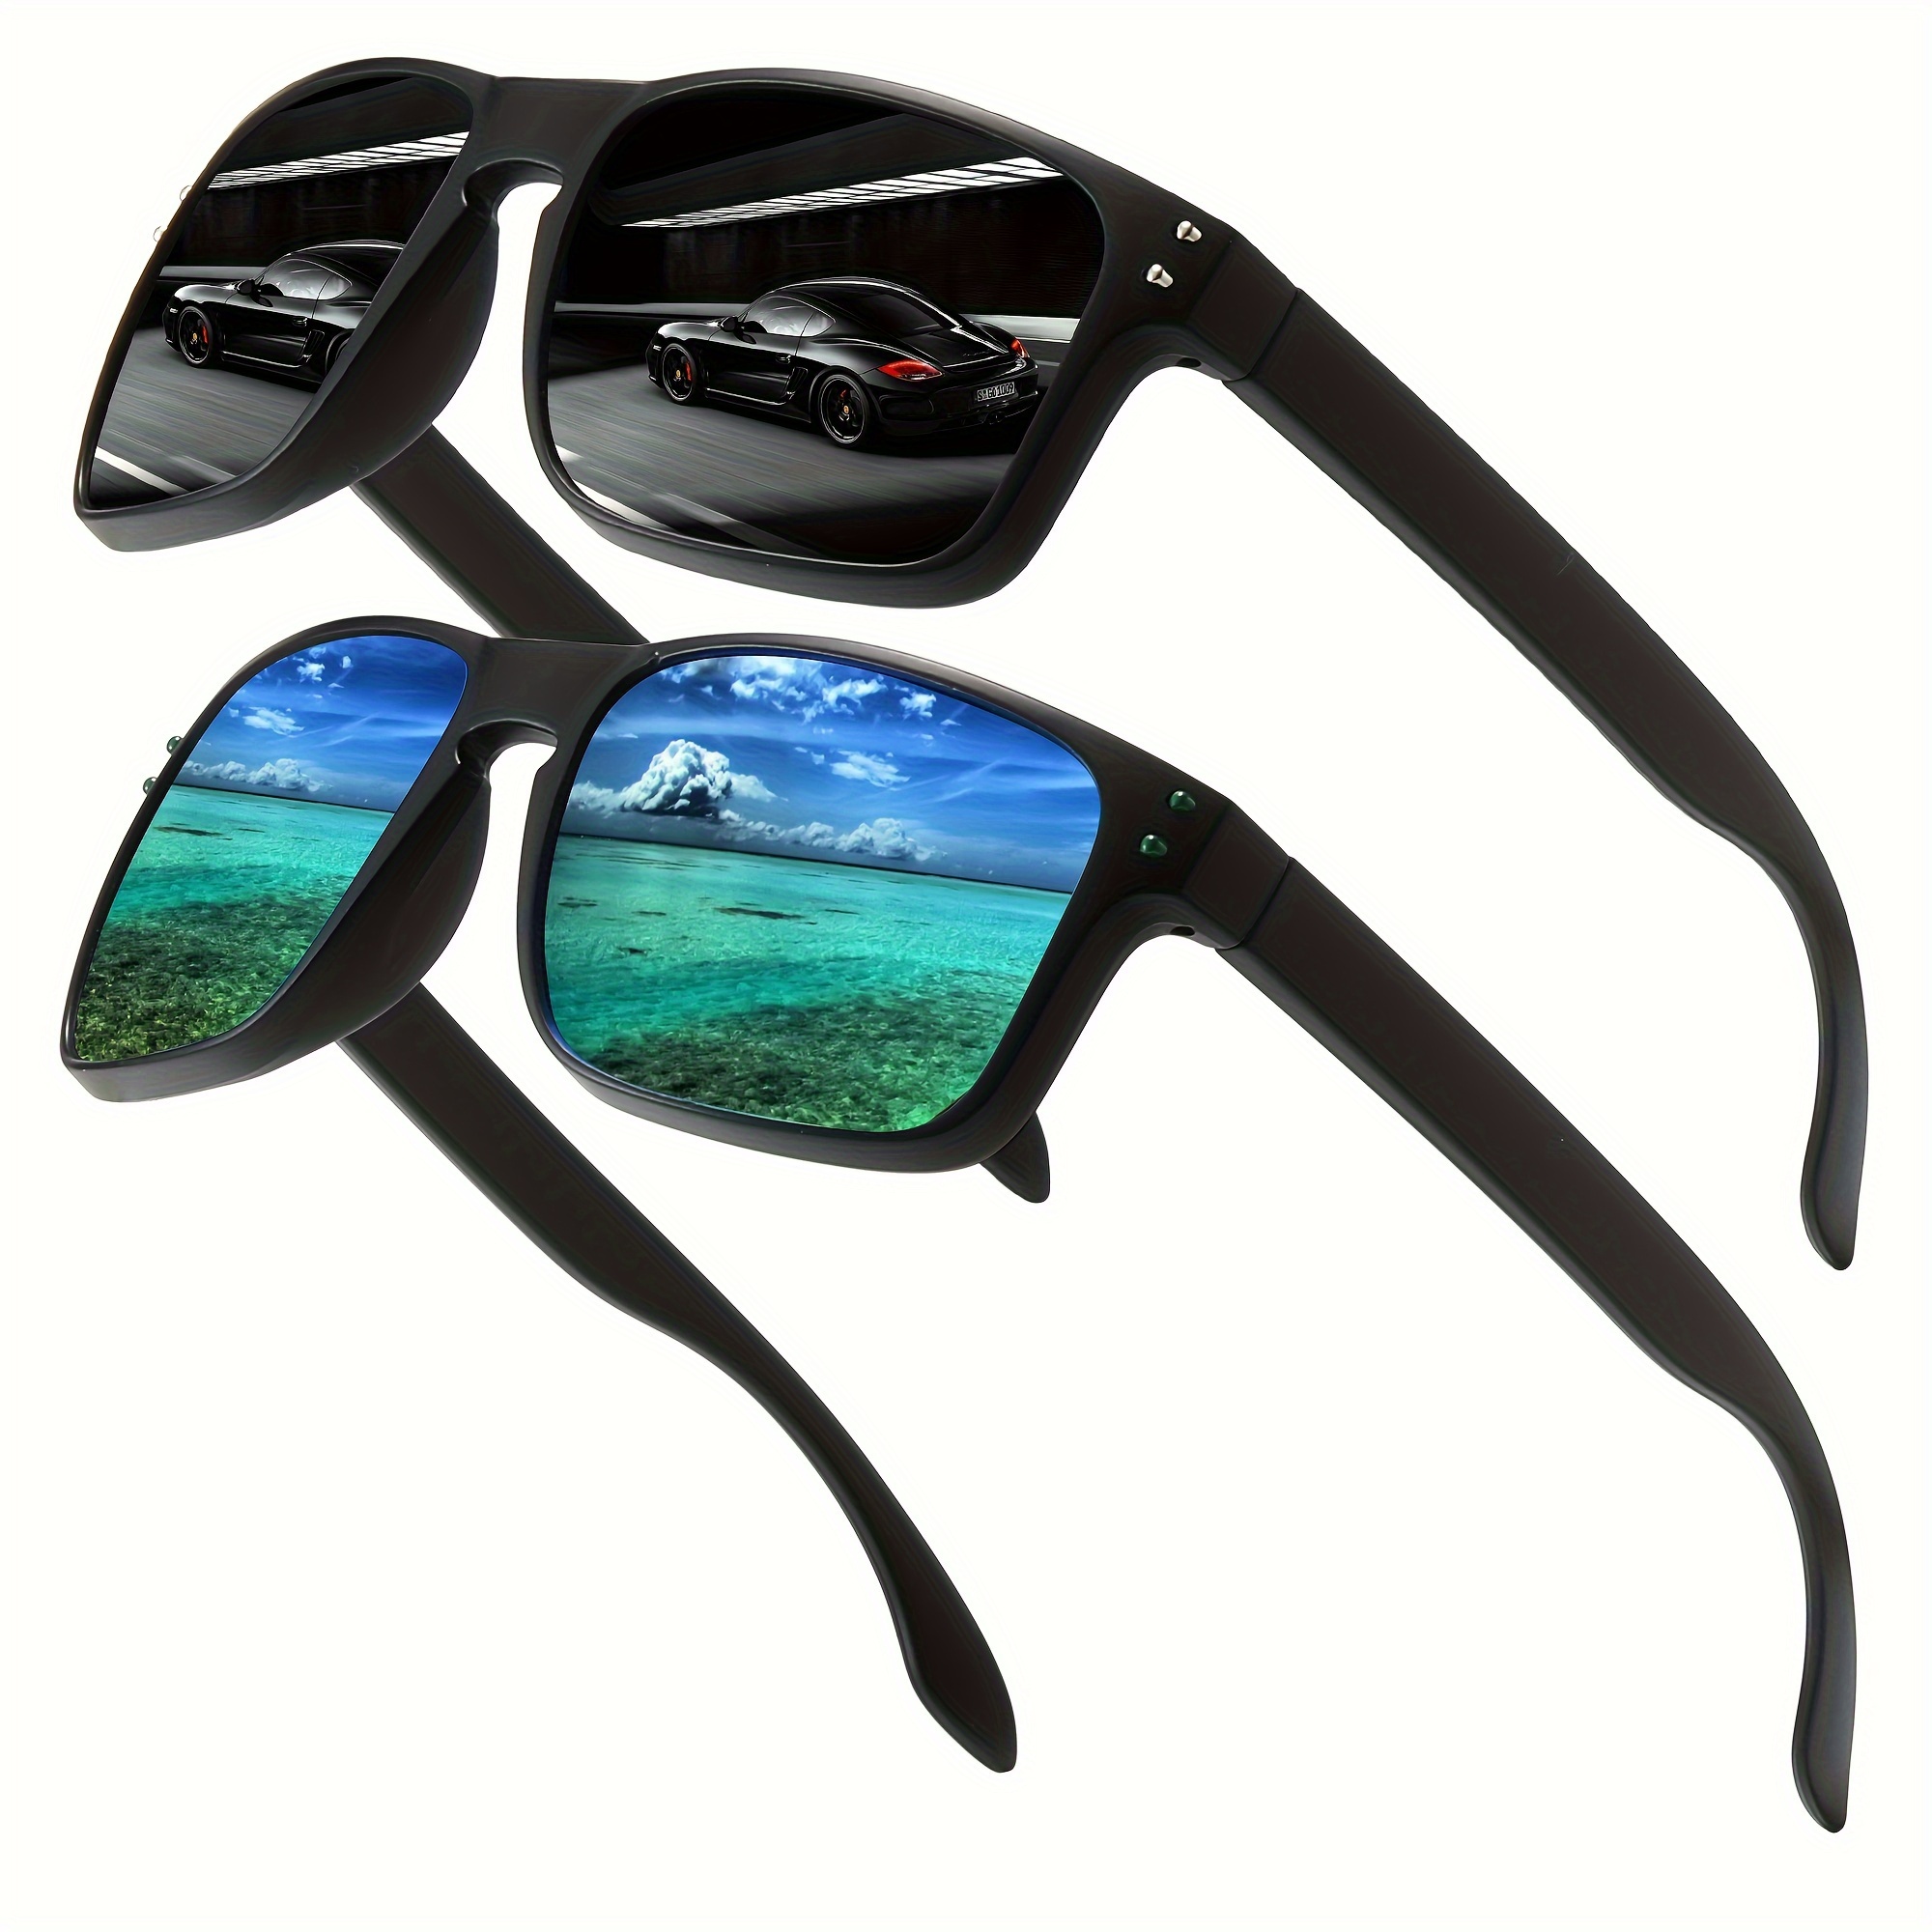 1pair/2pairs, Trendy Classic Square Polarized Sunglasses, For Men Women Outdoor Party Vacation Travel Driving Fishing Cycling Supplies Photo Props